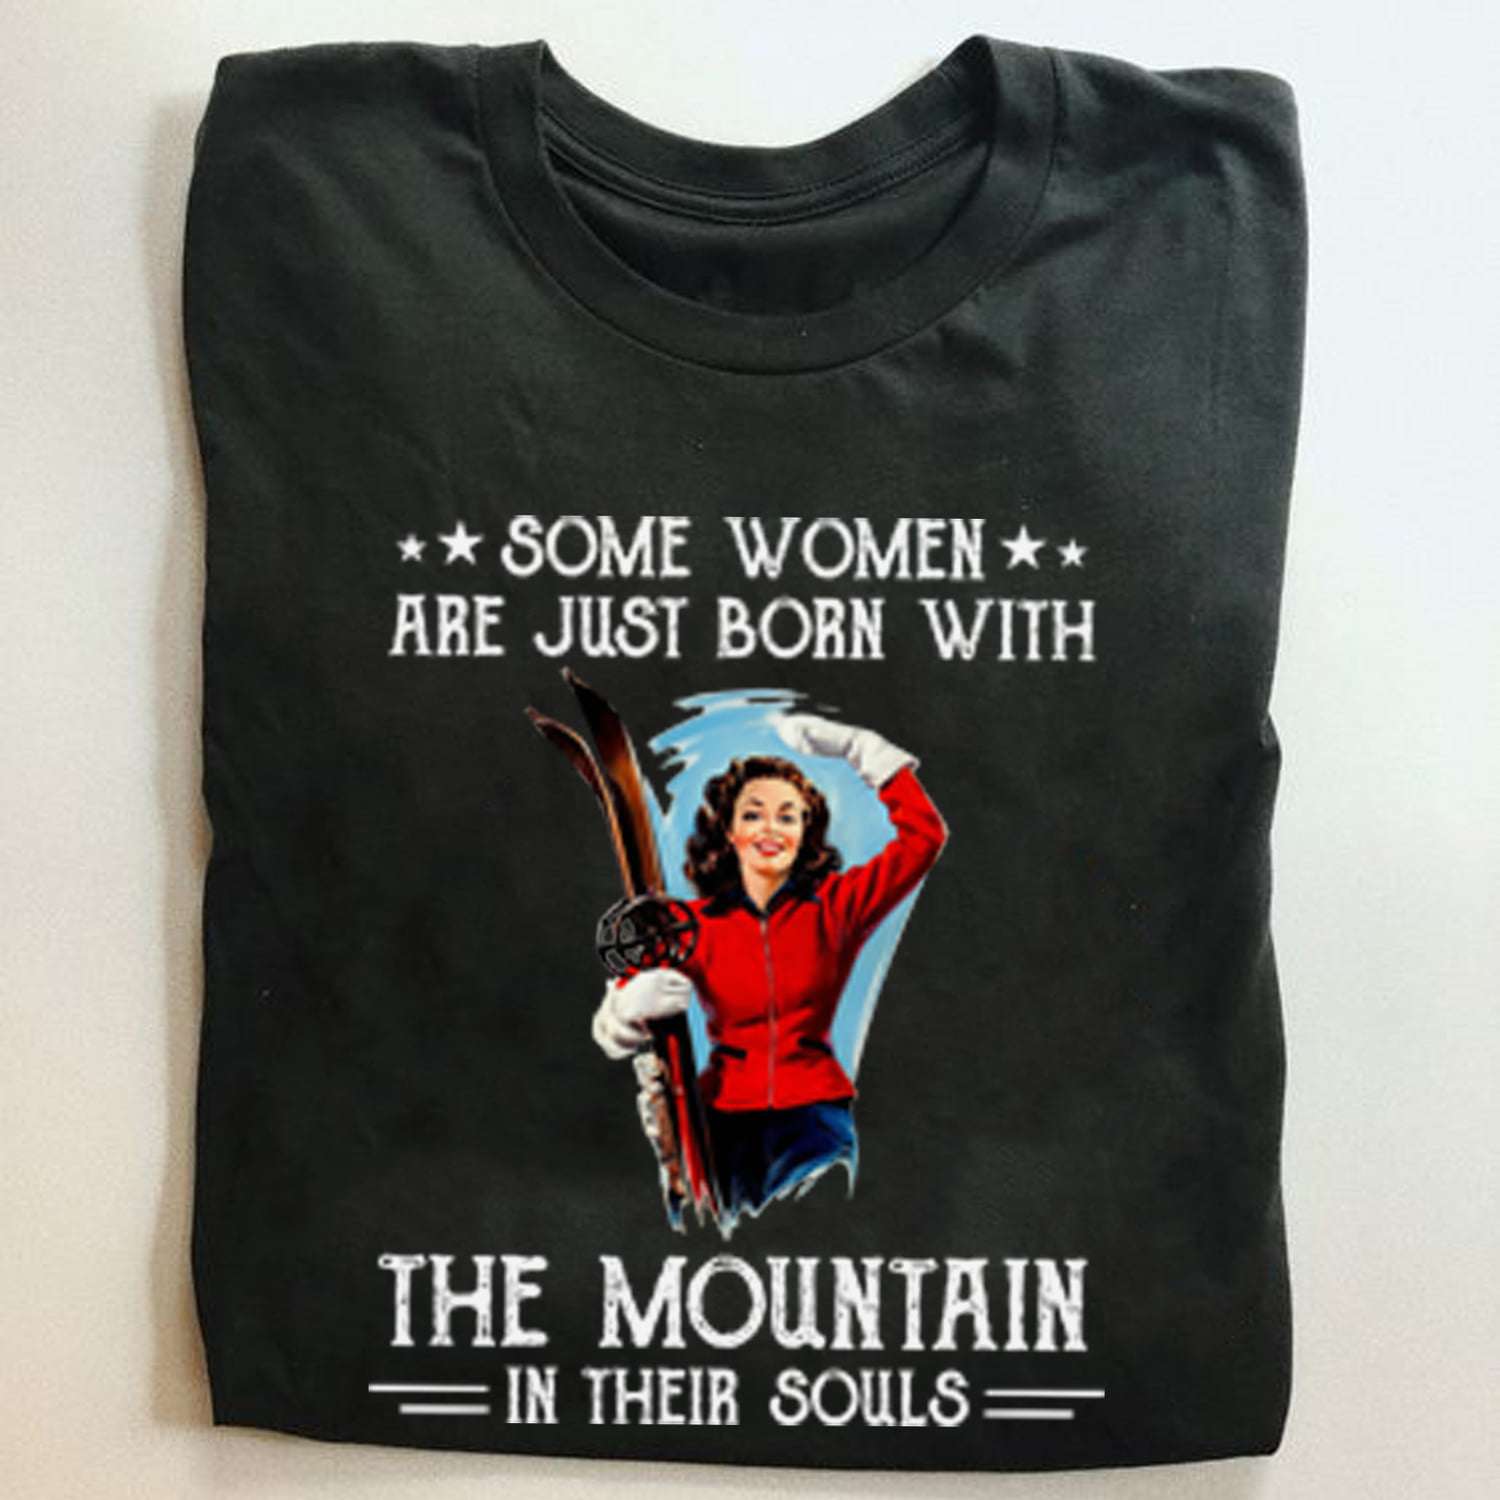 Some women are just born with the mountain in their souls - Women go skiing, skiing on the mountain